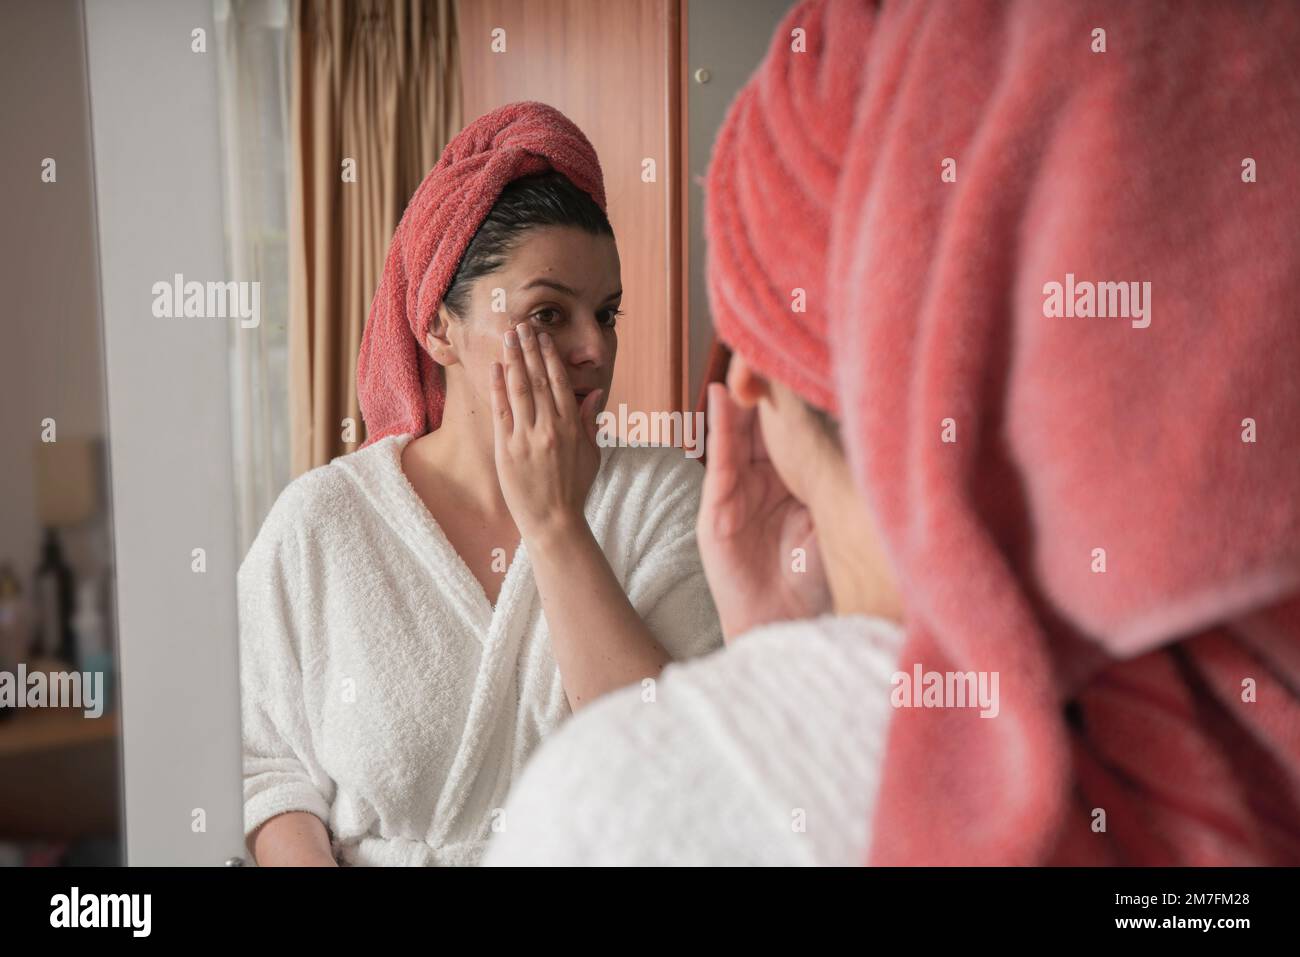 Beautiful Hispanic woman in a white bathrobe and red towel in her hair applying makeup with her hand on her face in front of the mirror on the closet Stock Photo